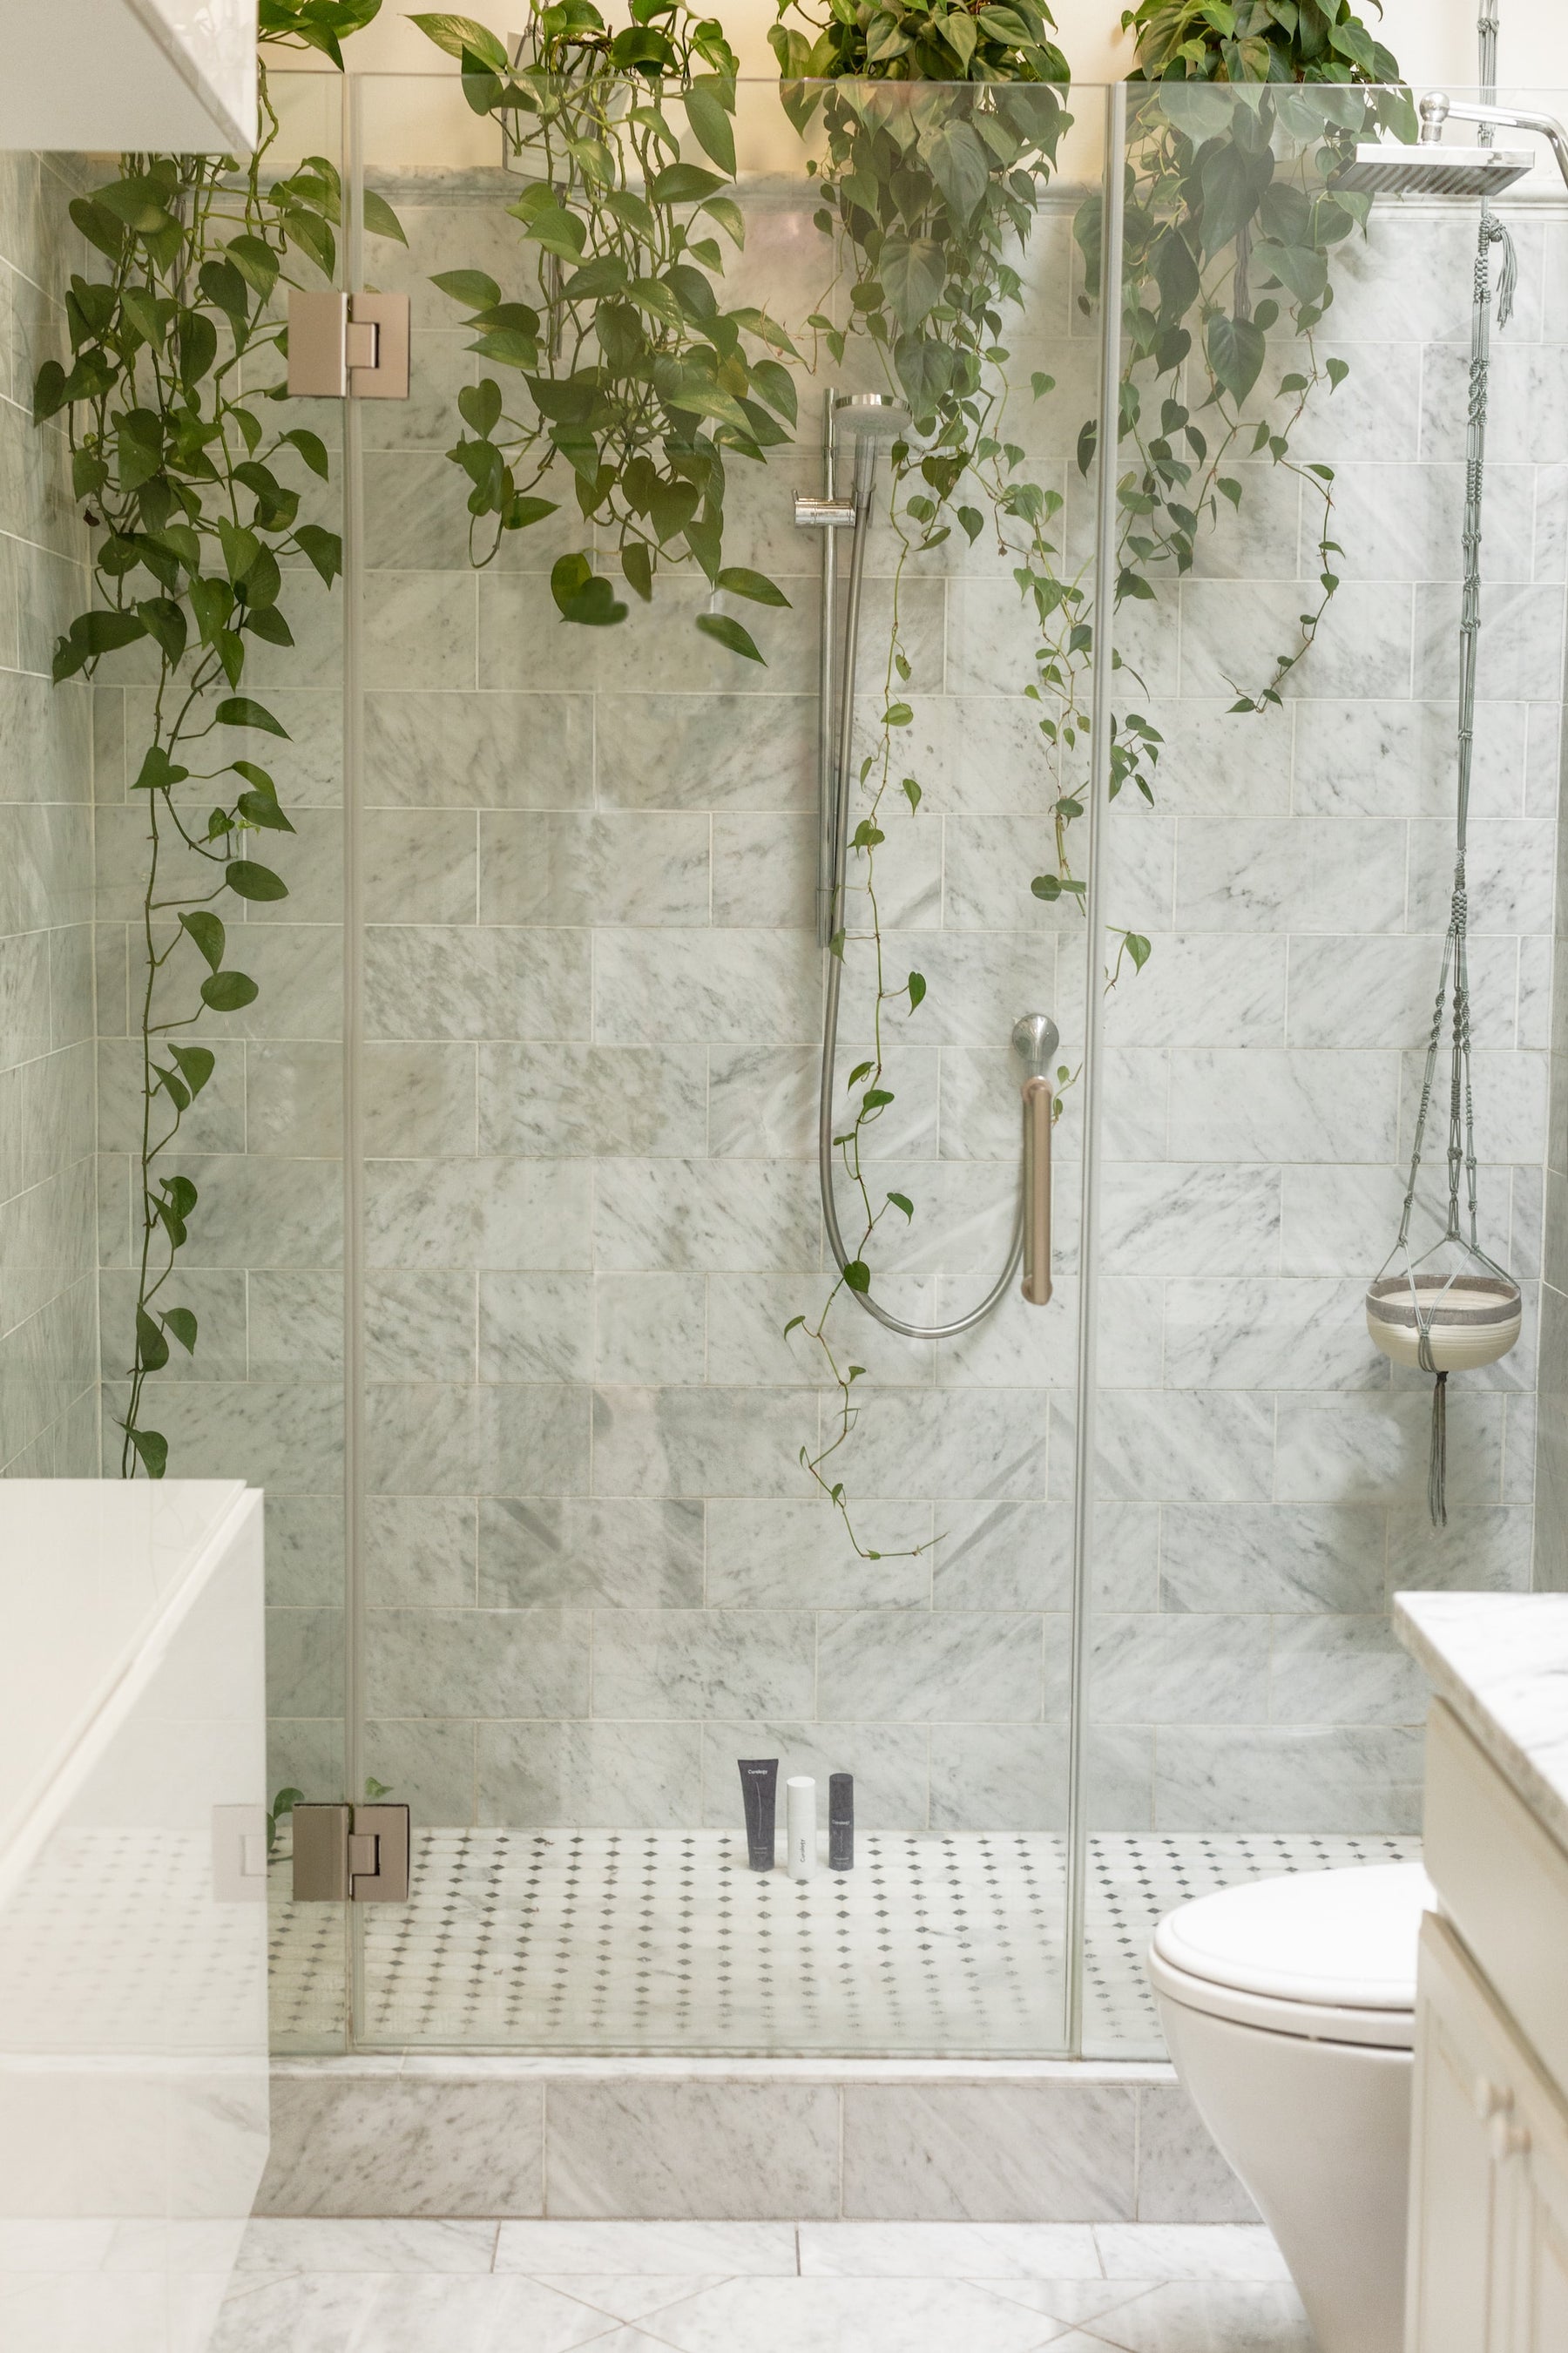 Transforming Your Bathroom: Sustainable Tips for an Eco-Friendly Oasis